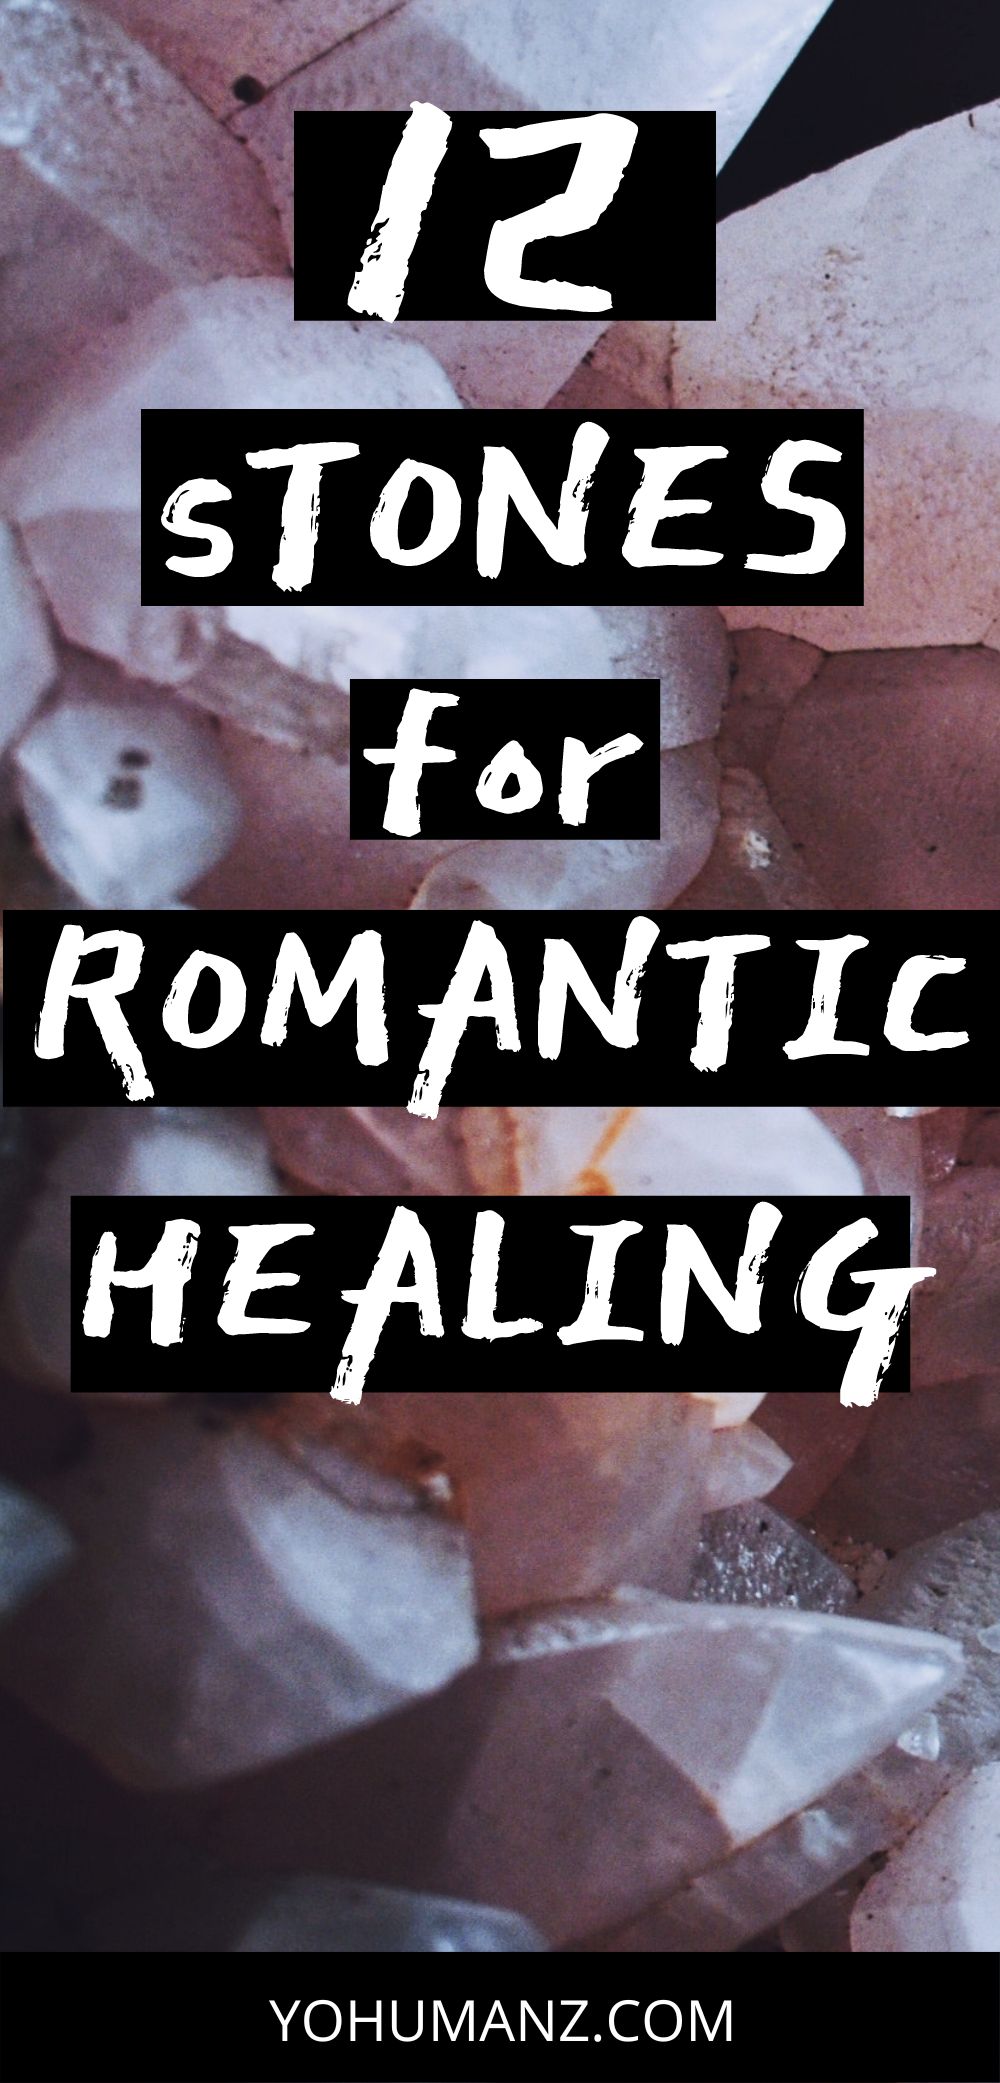 Crystals for Love and Healing